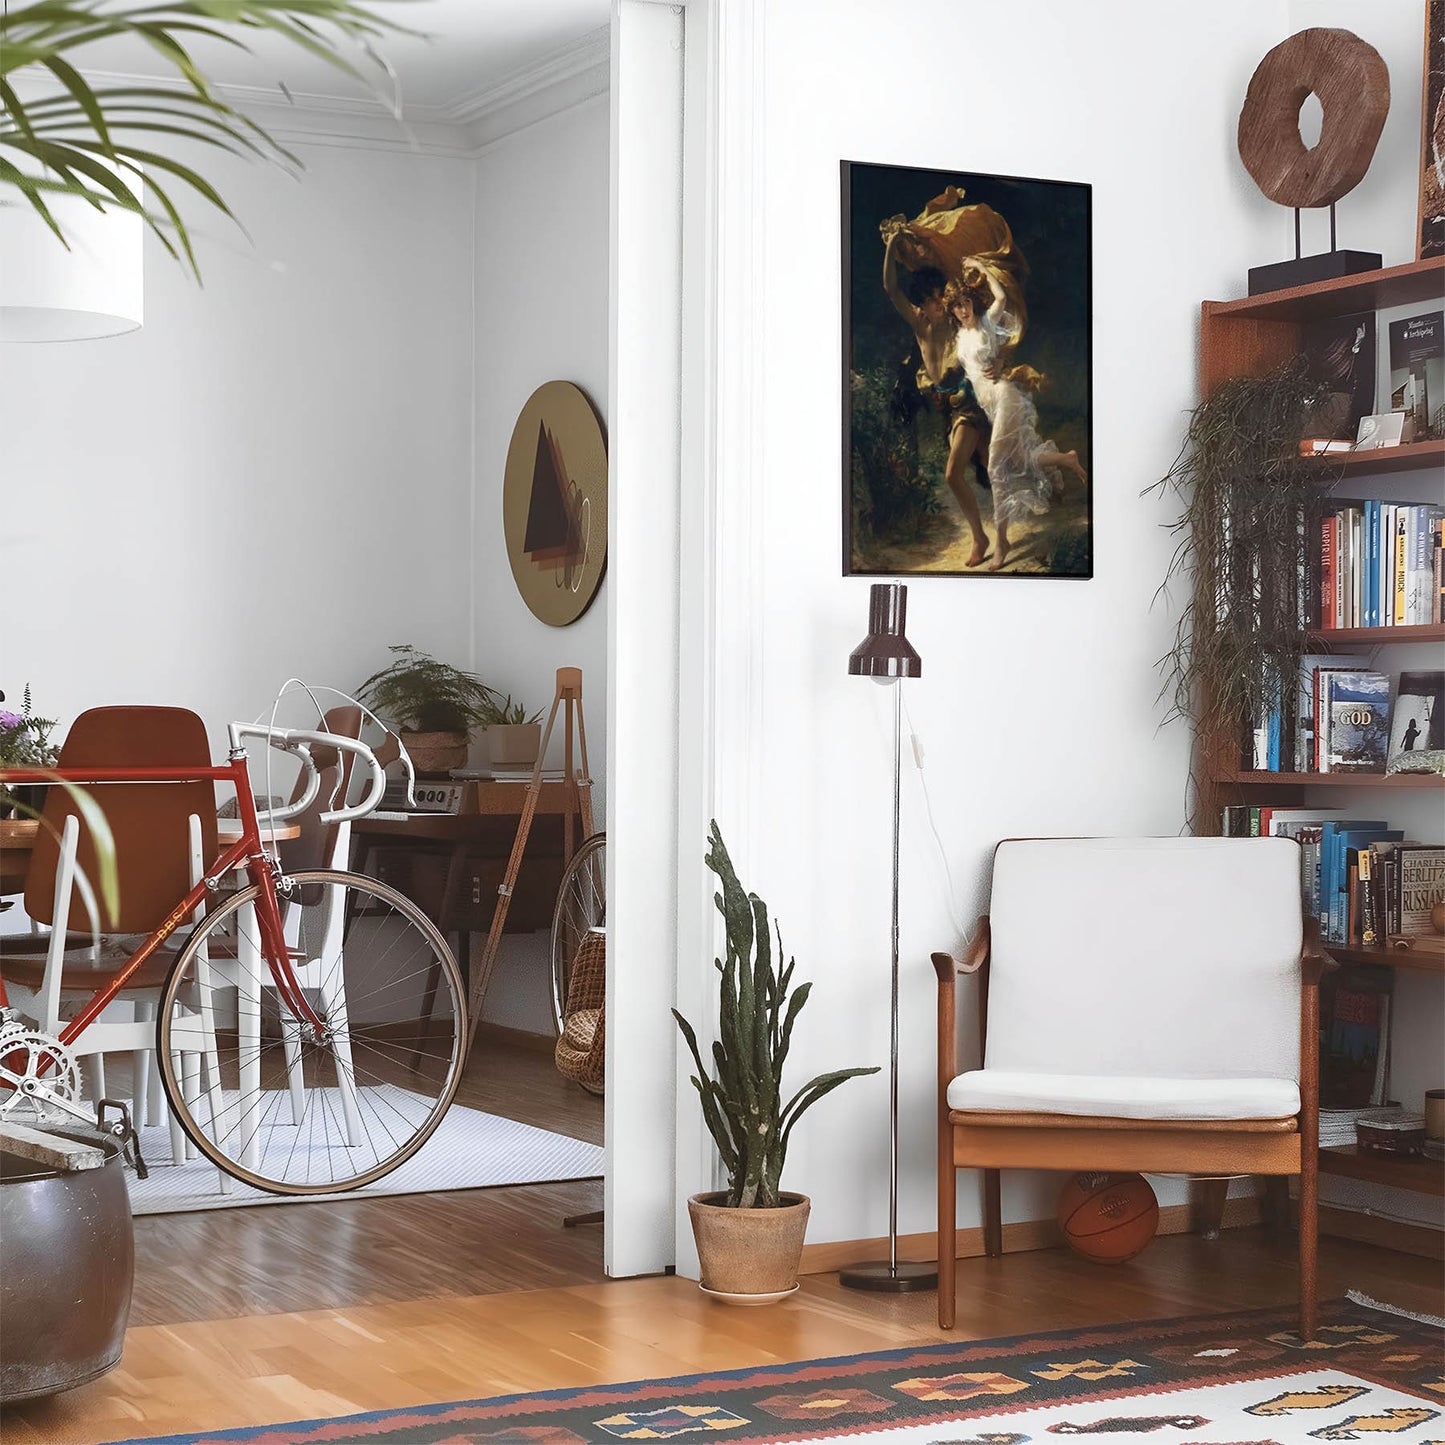 Eclectic living room with a road bike, bookshelf and house plants that features framed artwork of a Romance above a chair and lamp